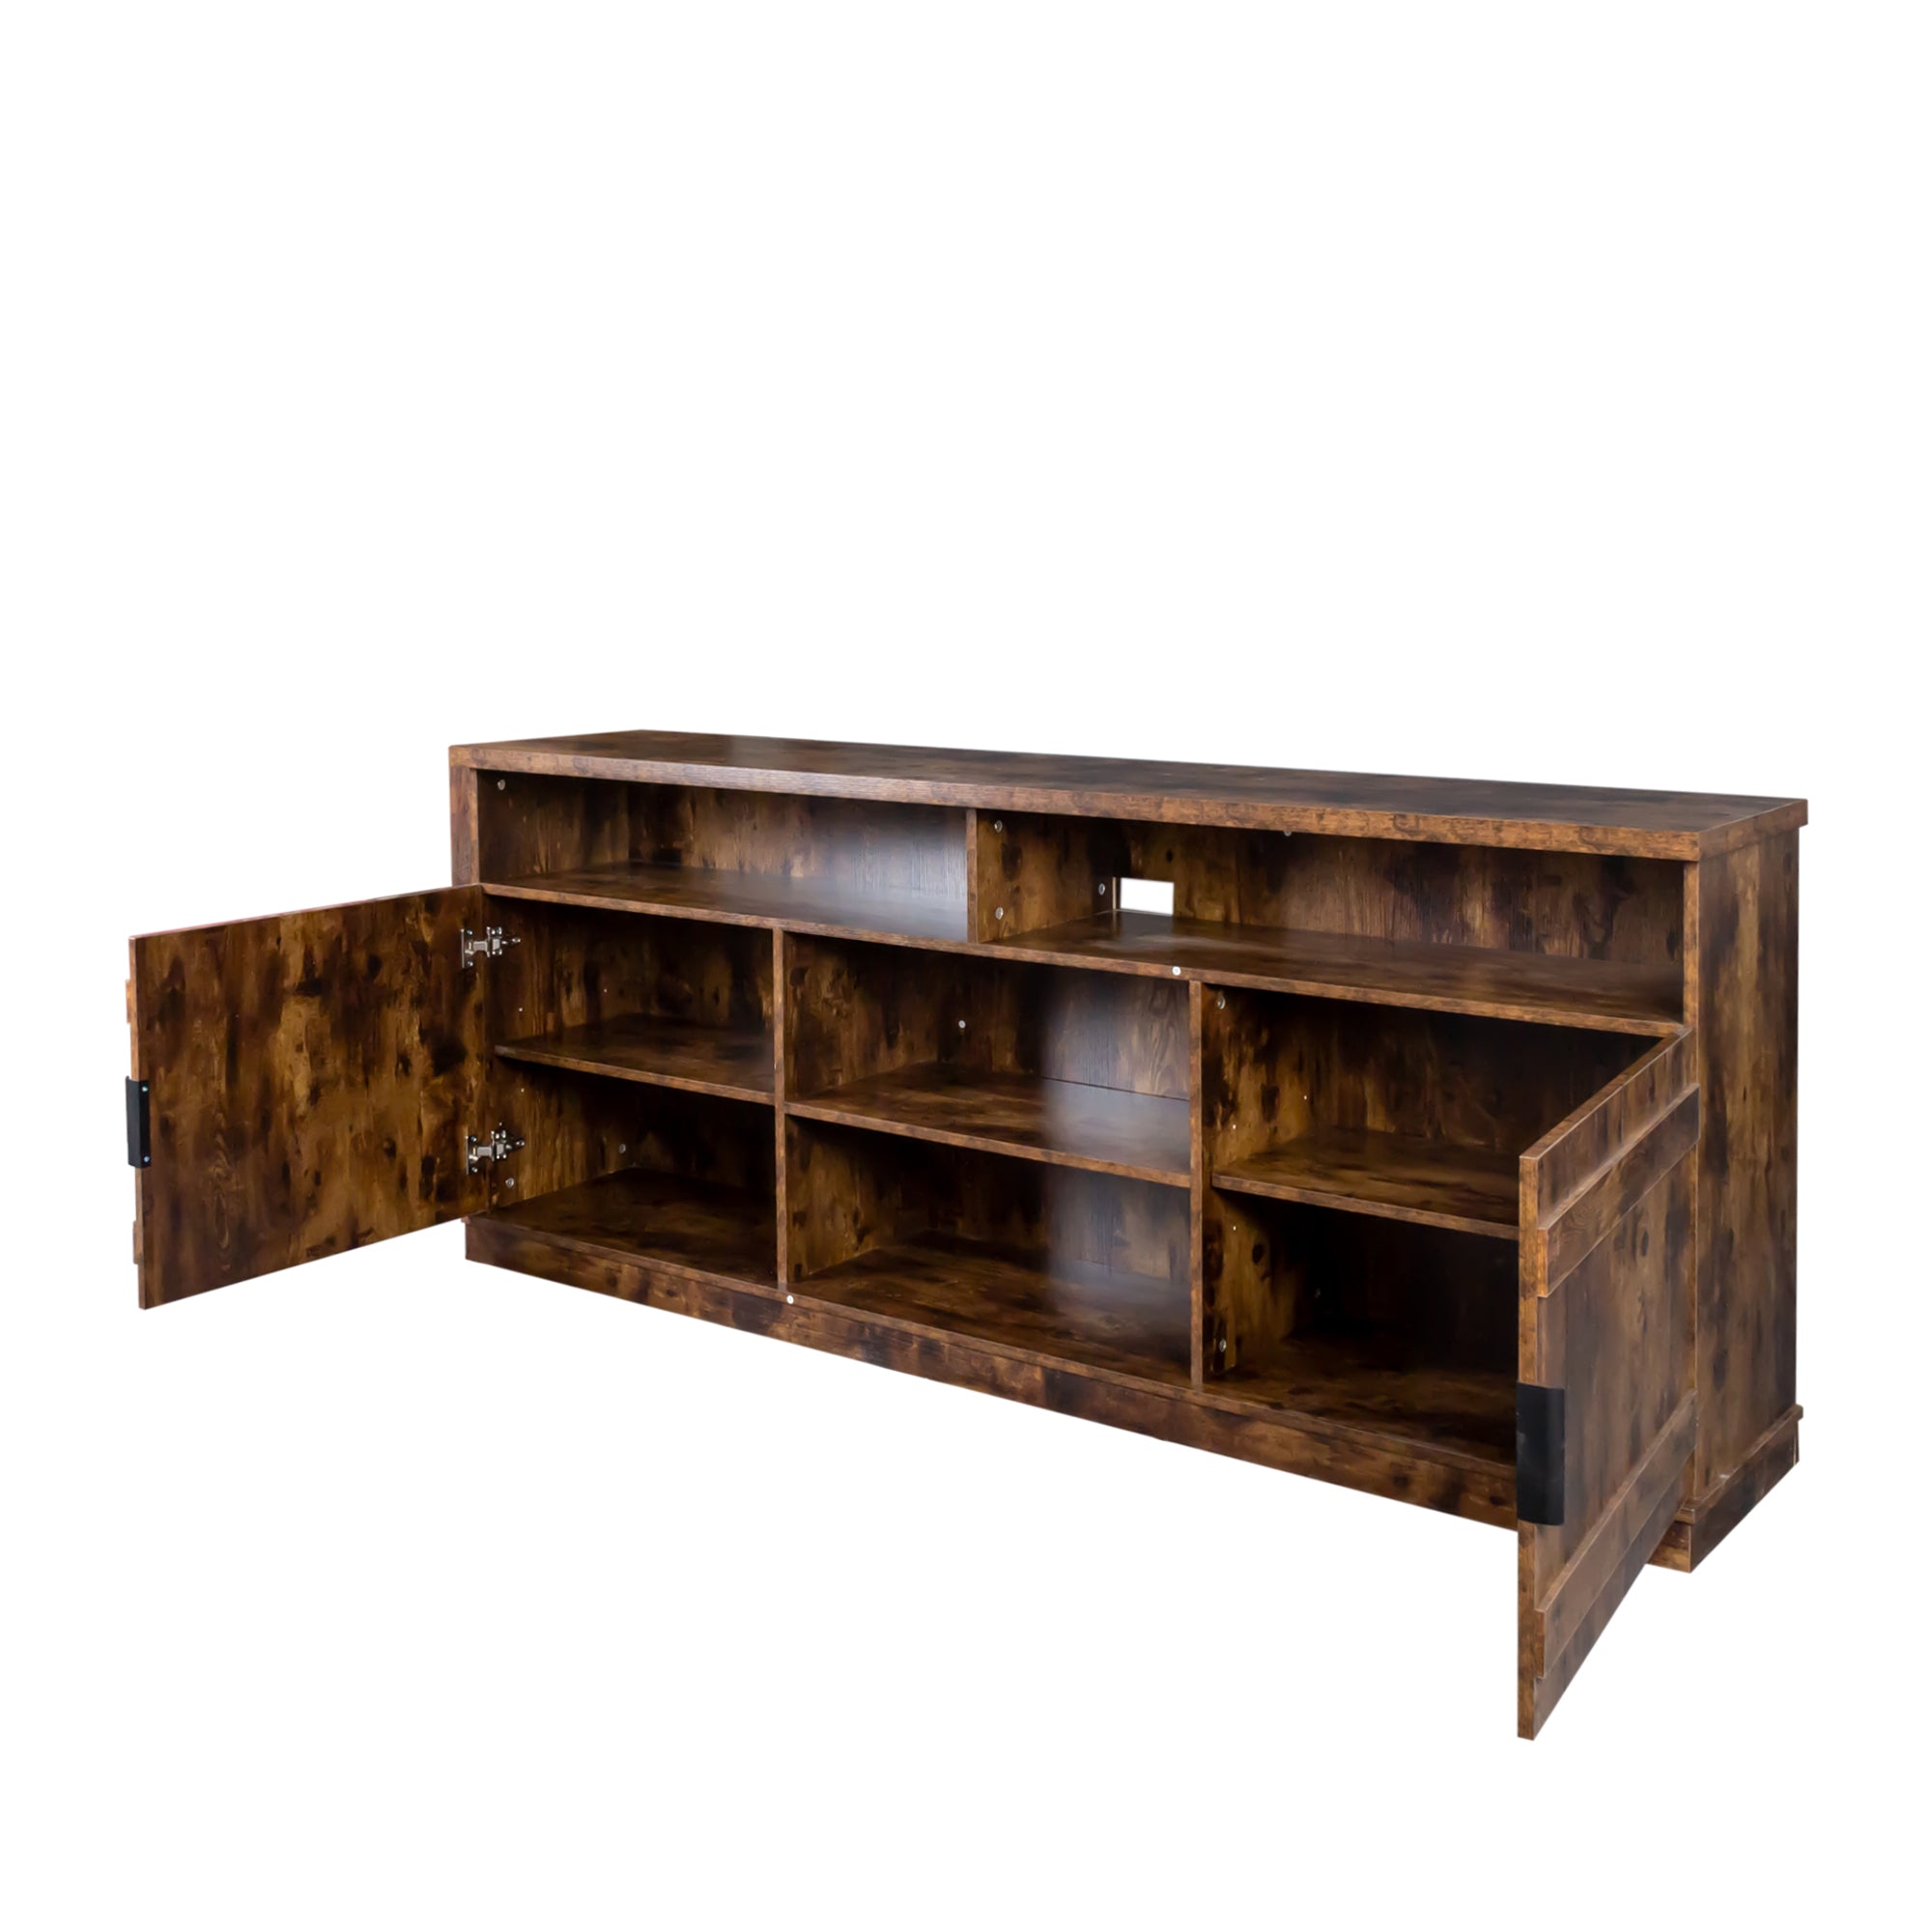 Modern Wood TV Stand with 3 Layers of Open Shelves & 2 Large-capacity Cabinets, Walnut